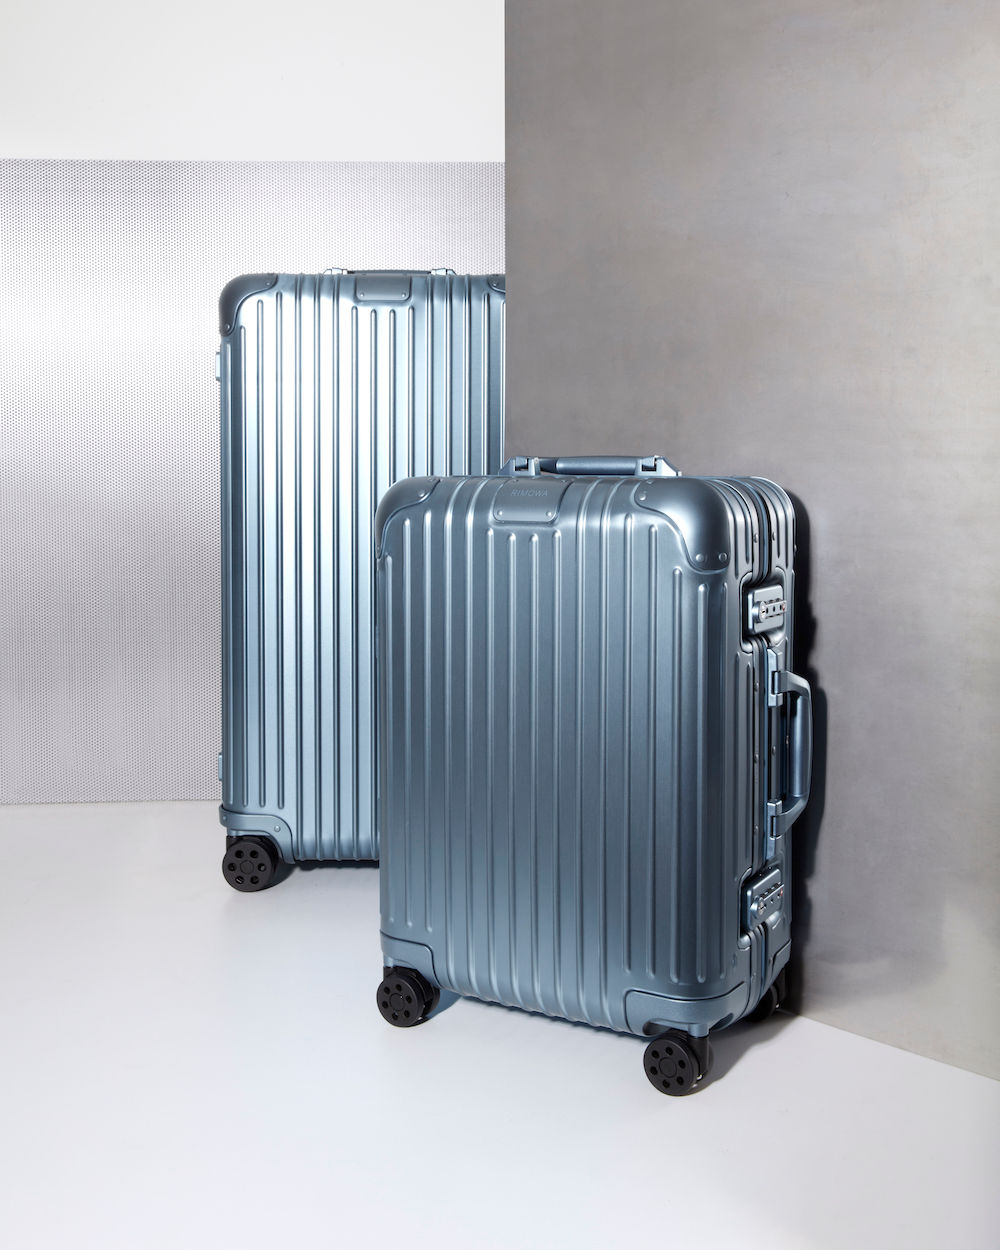 Travel The World With These New RIMOWA Luggage Colours